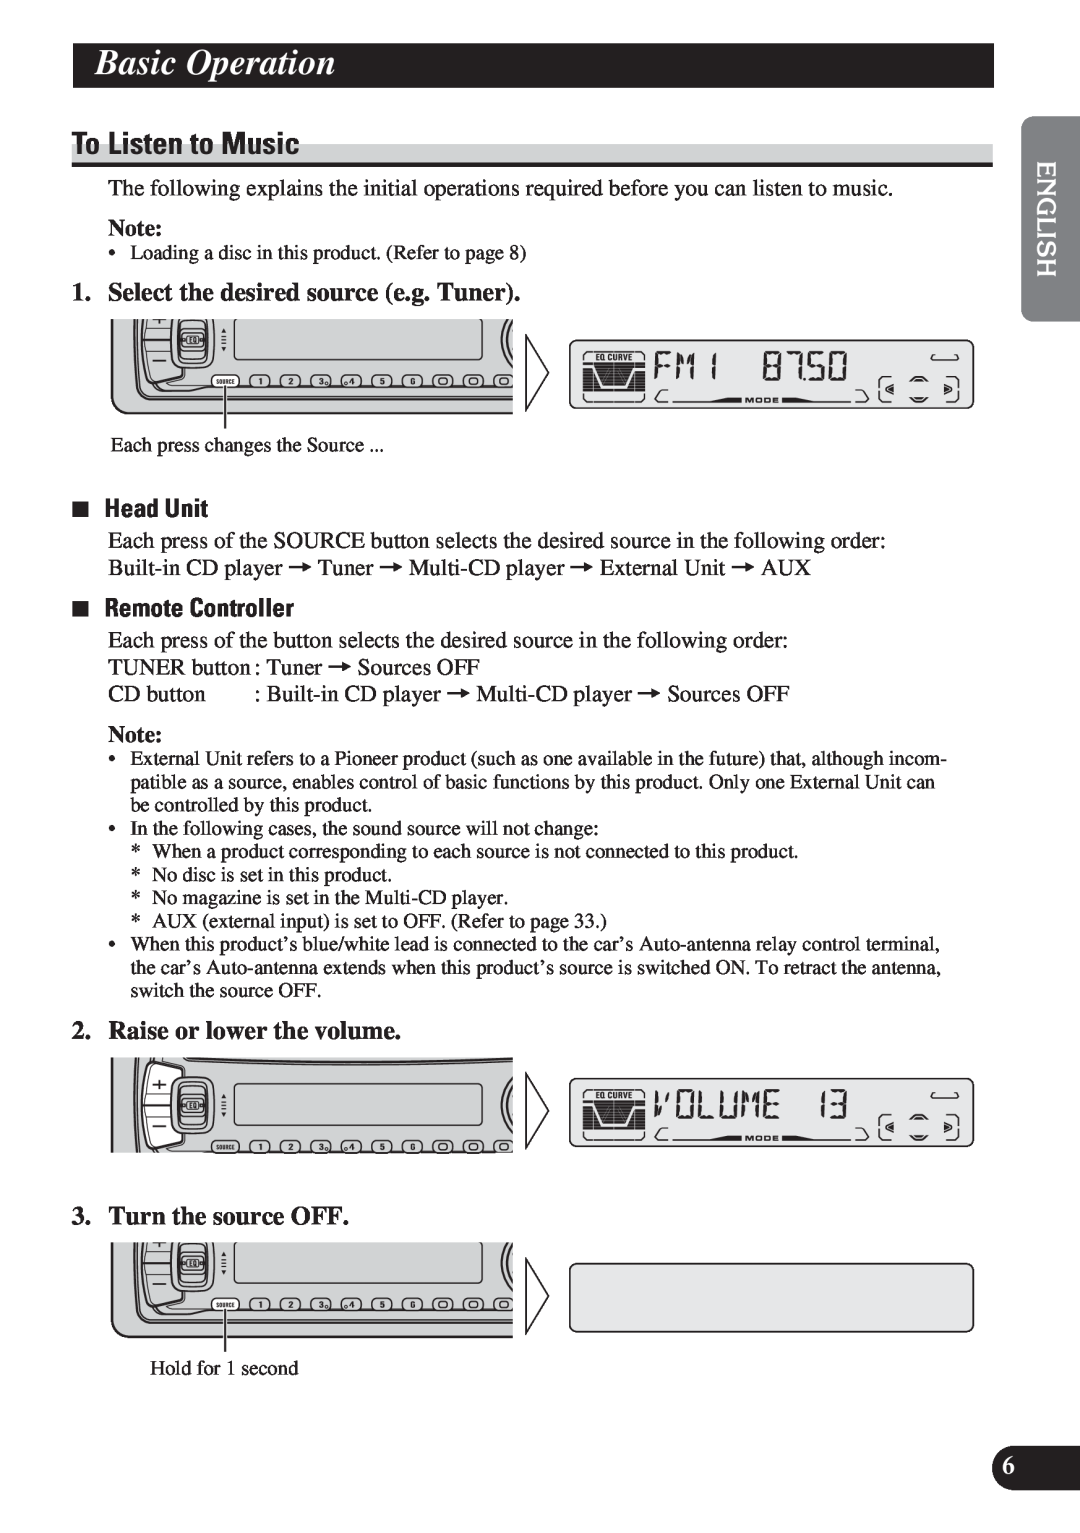 Pioneer DEH-P4150 operation manual Basic Operation, To Listen to Music, Select the desired source e.g. Tuner, 7Head Unit 